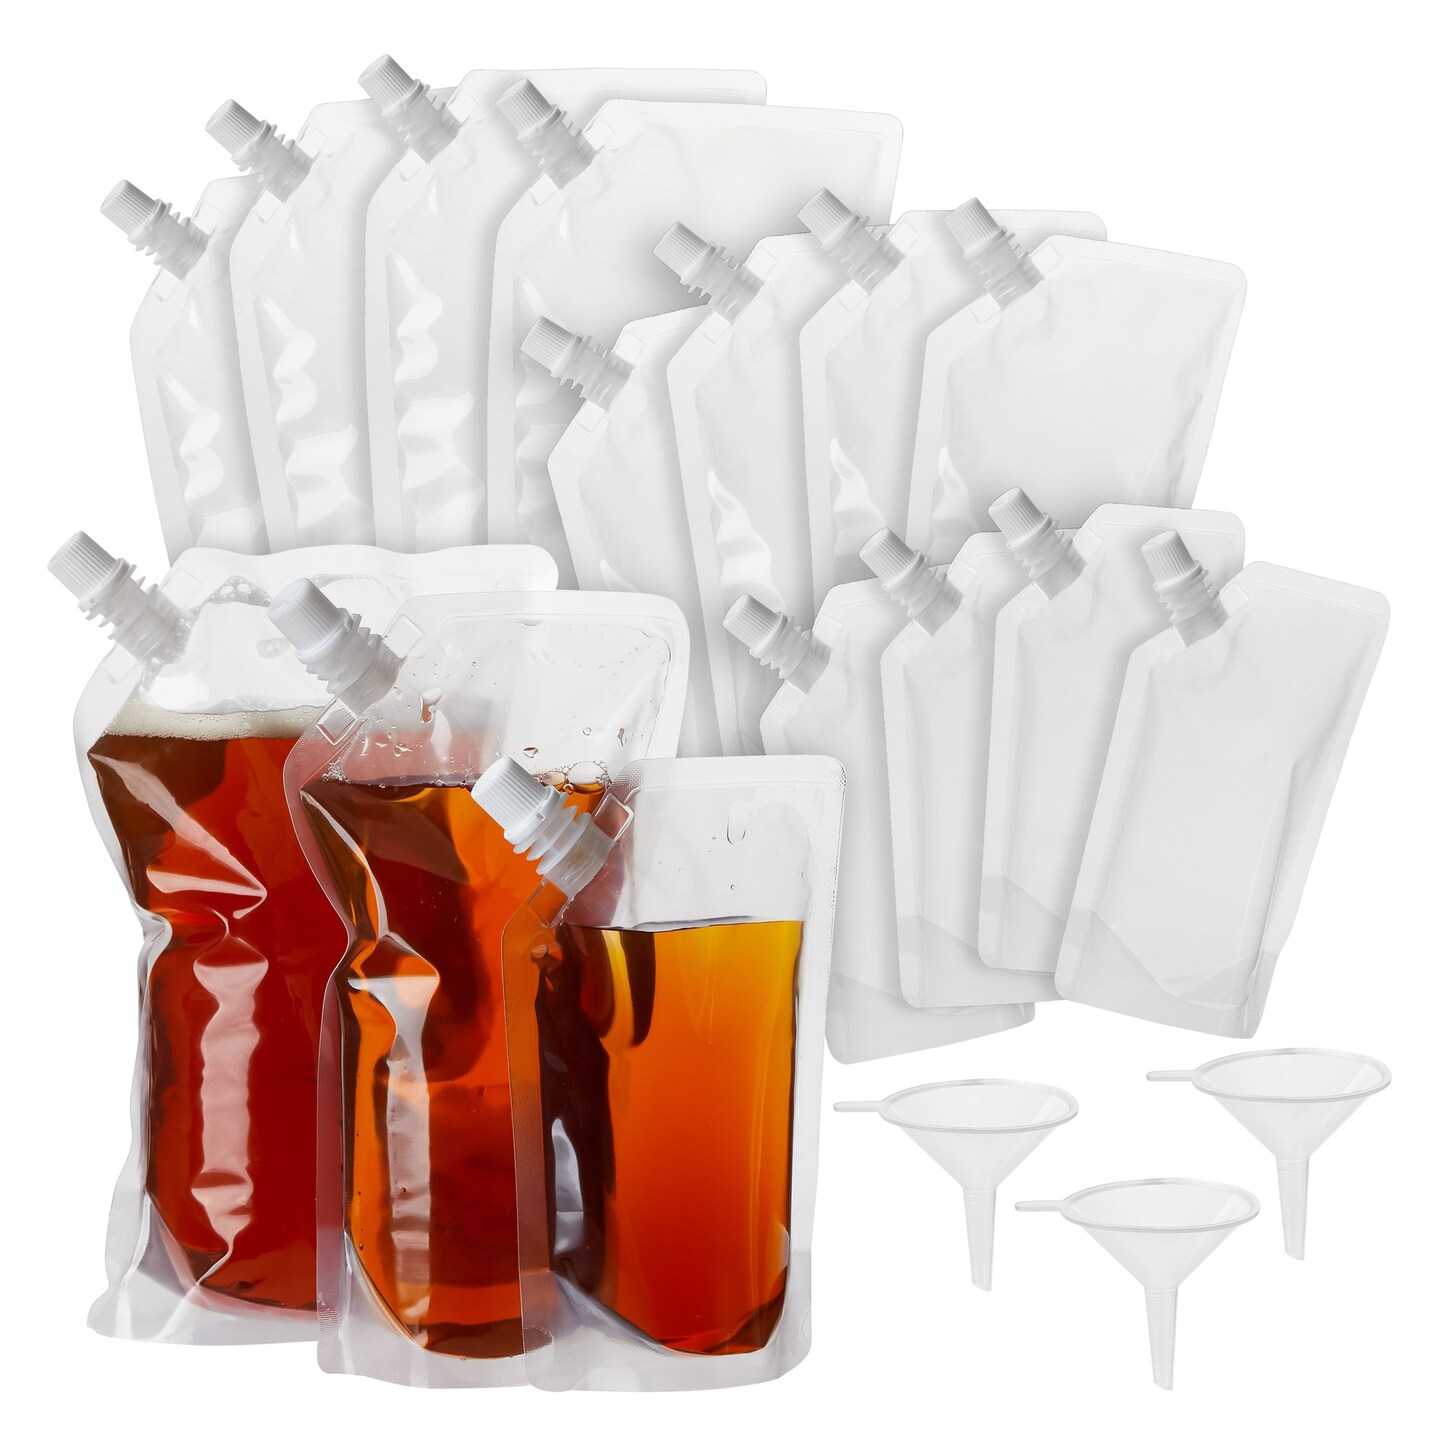 30 Pack Reusable Adult Plastic Drink Pouches with Funnels for Juice, Soda, Liquor (8, 16, 32 Ounces)